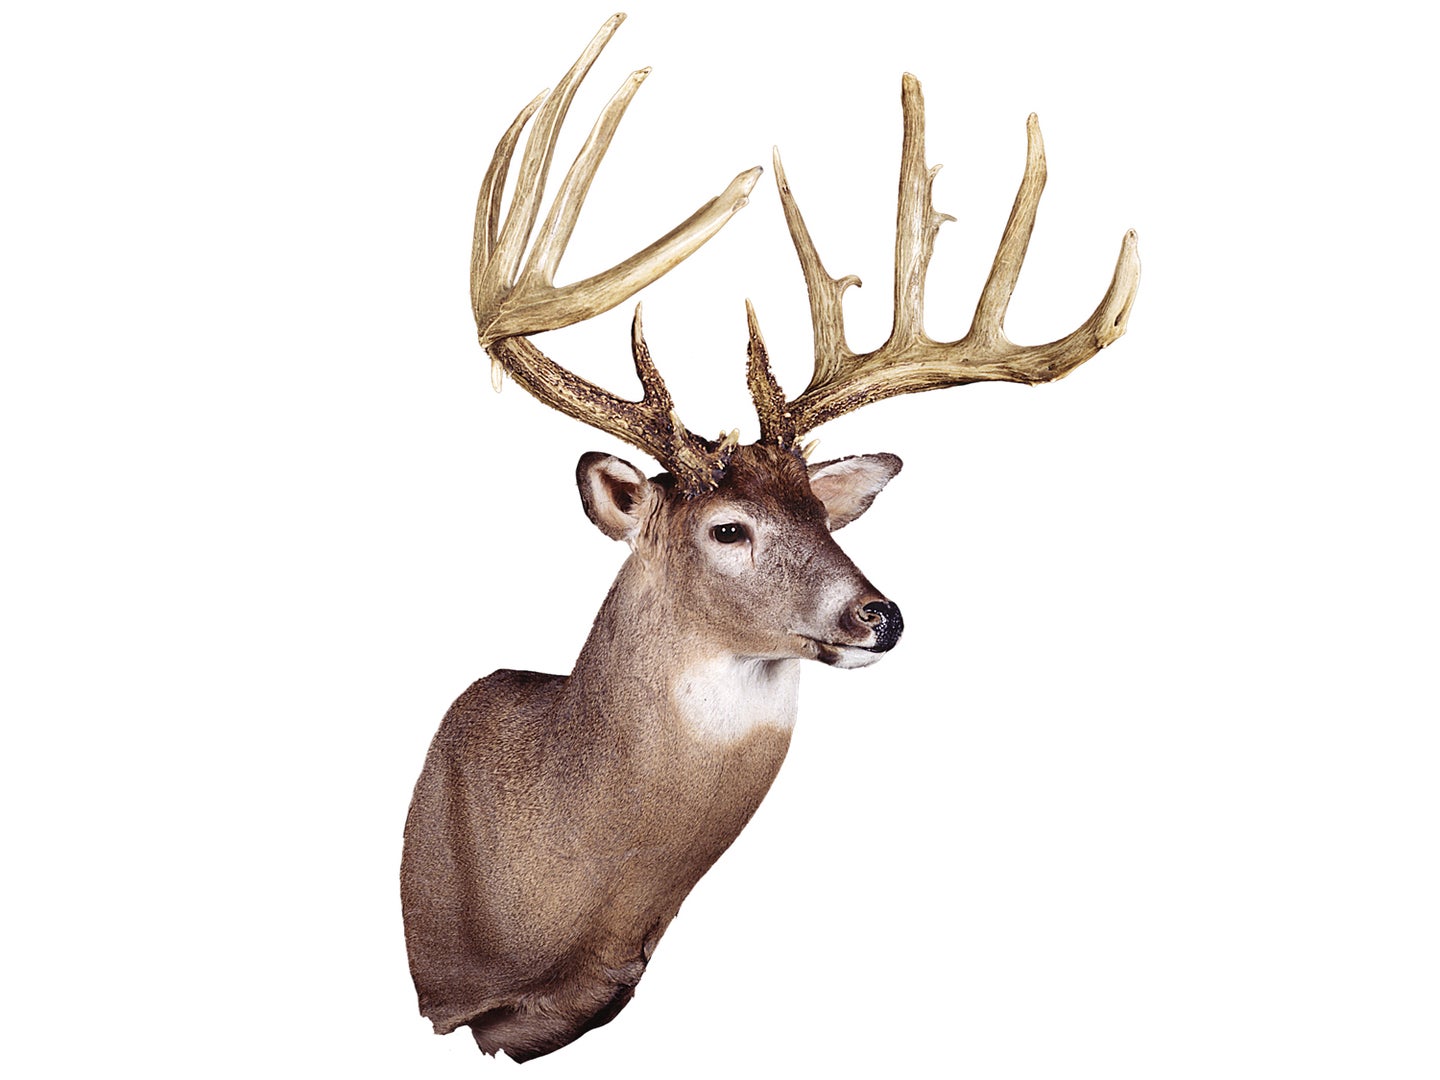 A trophy whitetail deer wall mount on a white background.